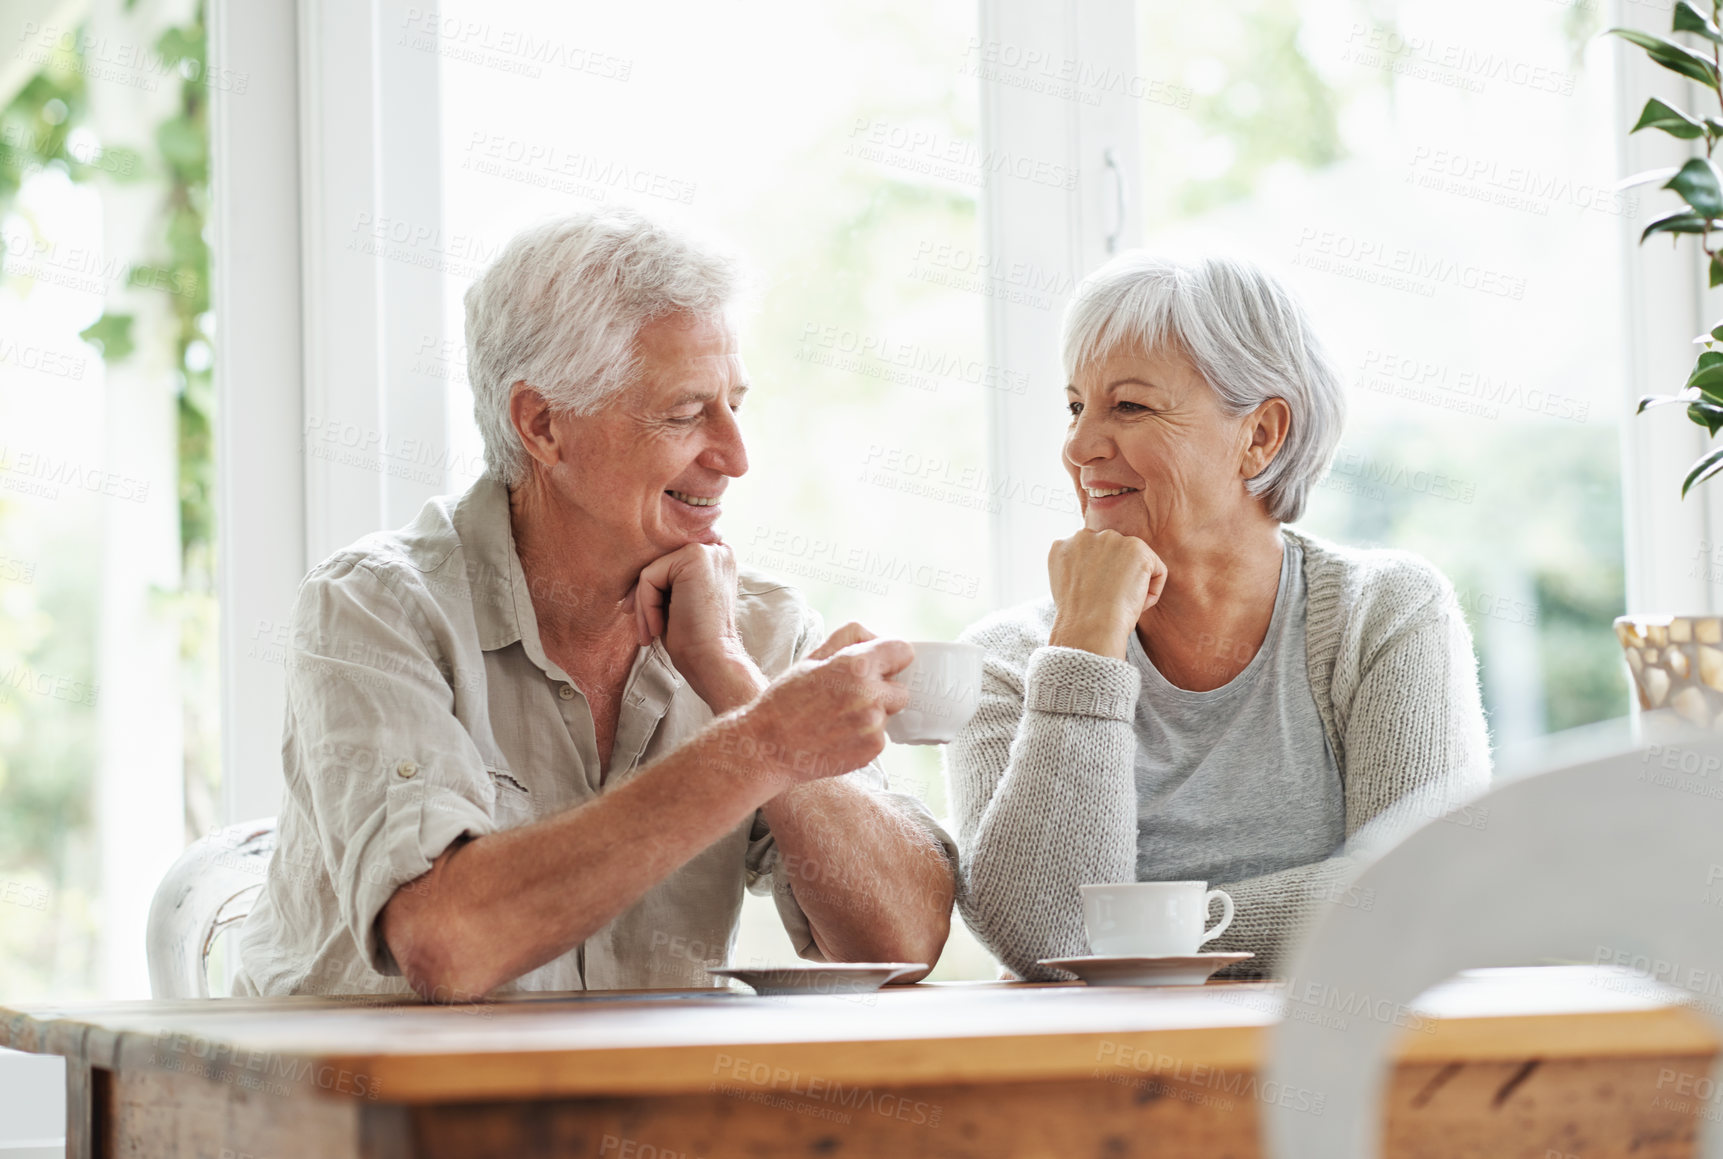 Buy stock photo A senior couple enjoying a cup of tea together